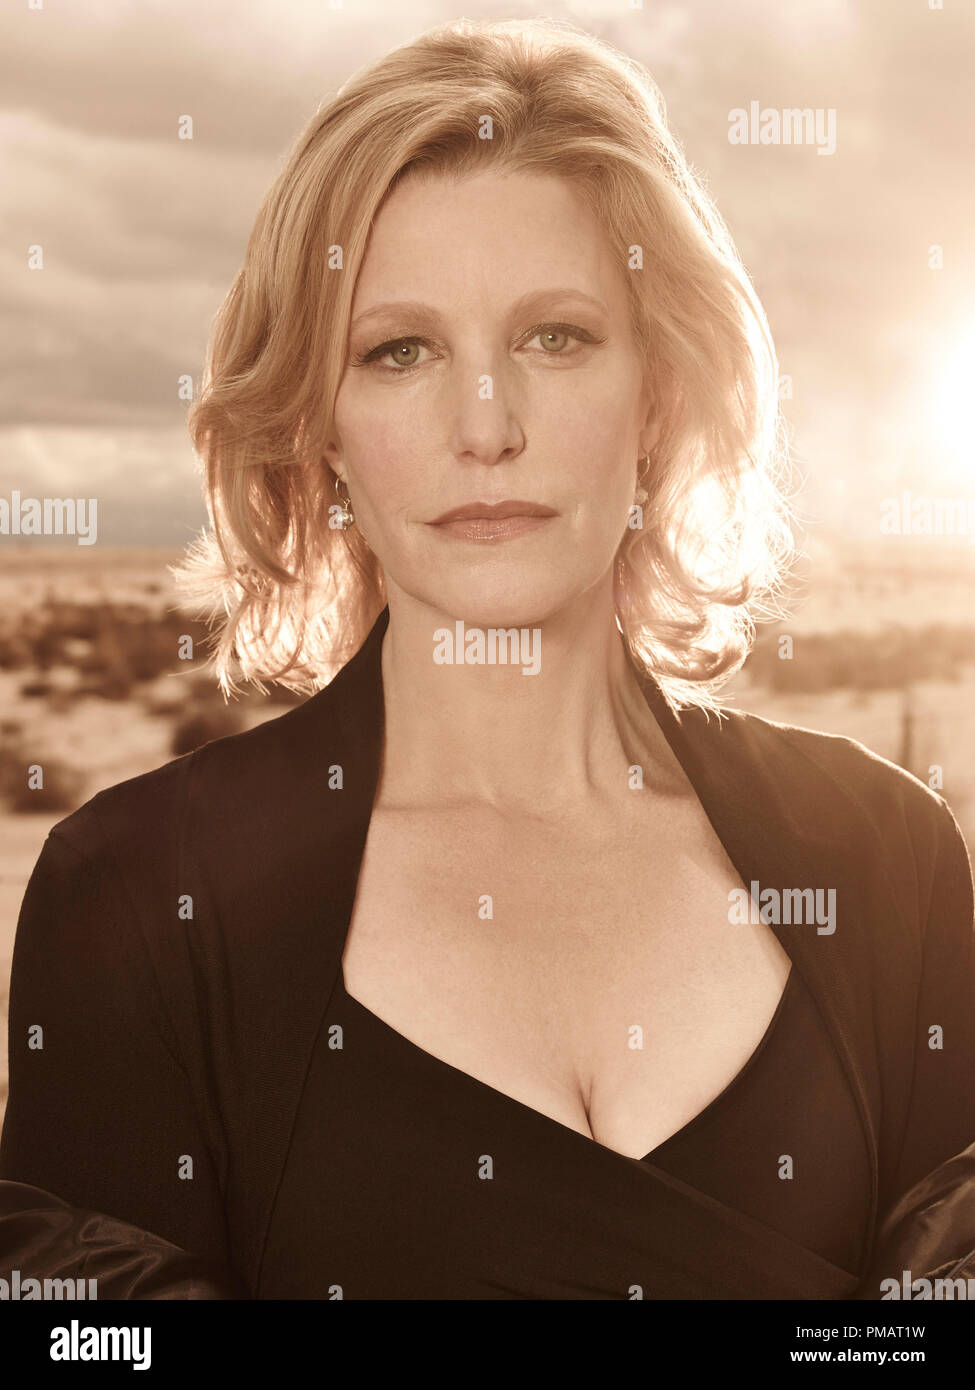 Anna Gunn Breaking Bad High Resolution Stock Photography and Images - Alamy